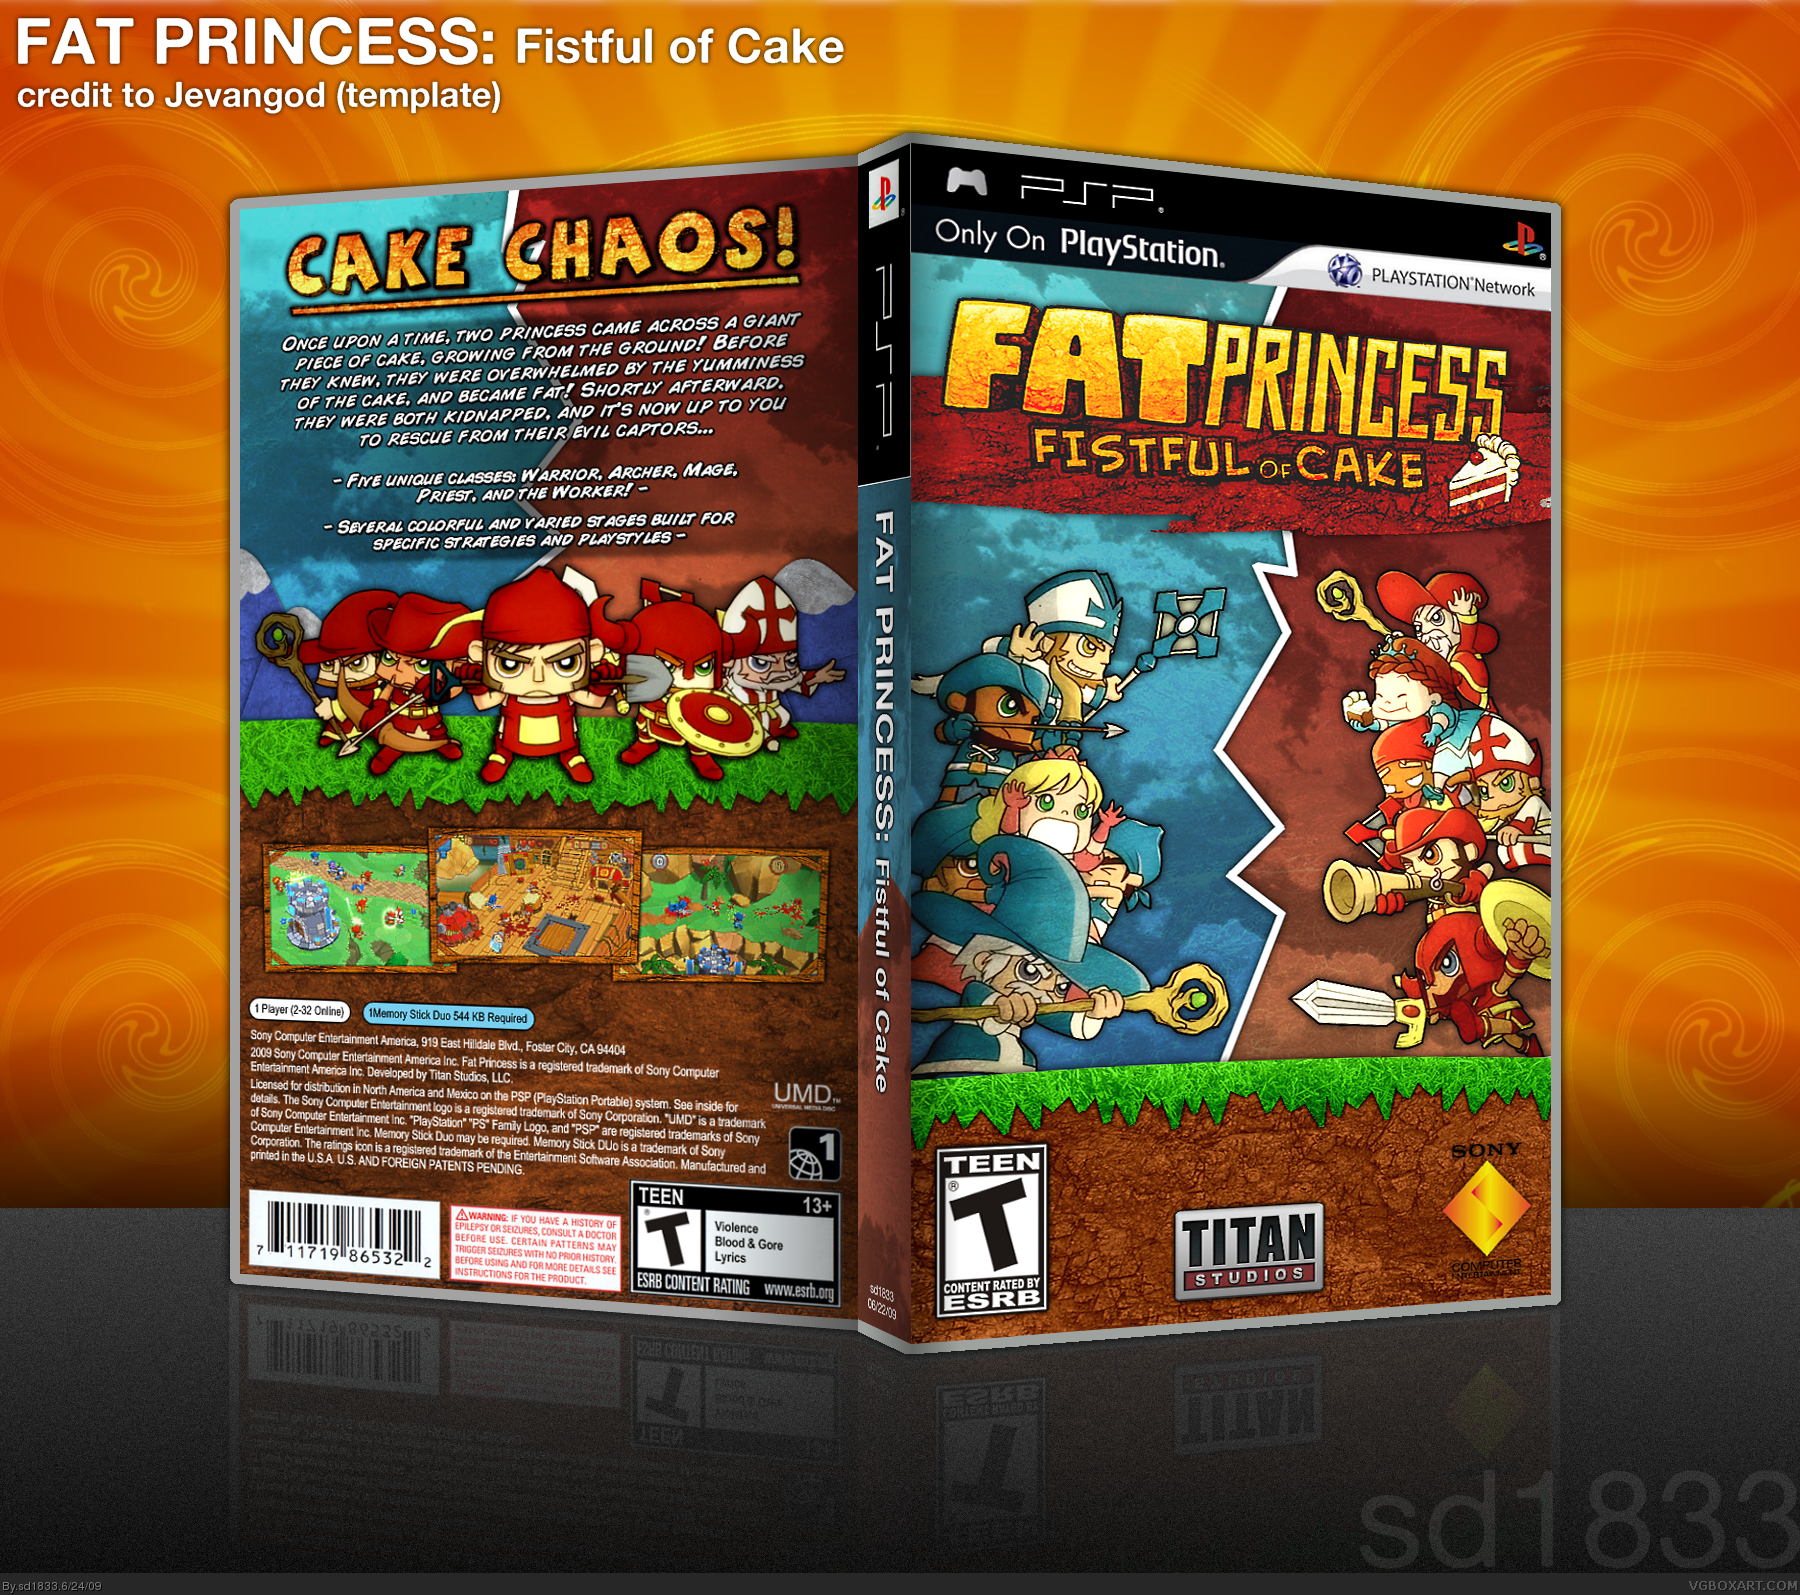 Fat Princess Fistful of Cake PSP. Fat Princess Fistful of Cake PSP обложка. Принцесса Обжора на PSP. Fat Princess: Fistful of Cake PSP Cover. F a d games